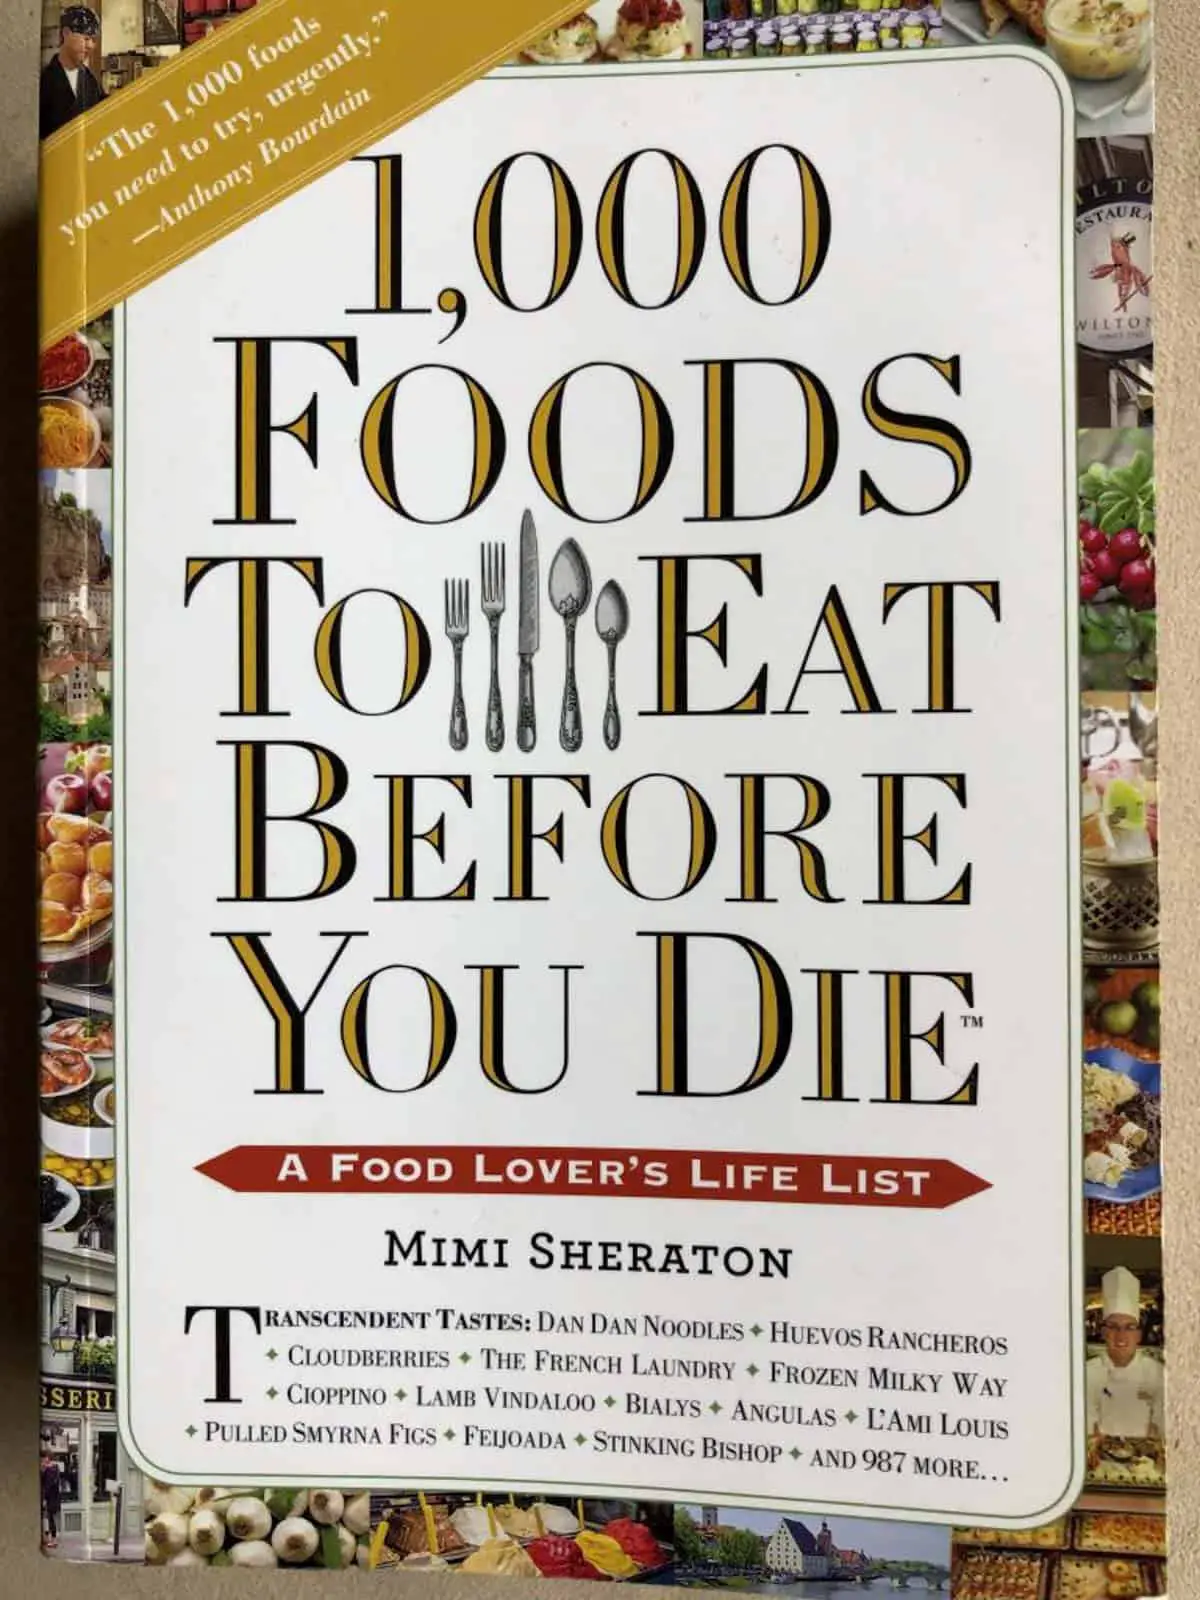 Jacket cover of the book 1,000 Foods to Eat Before You Die